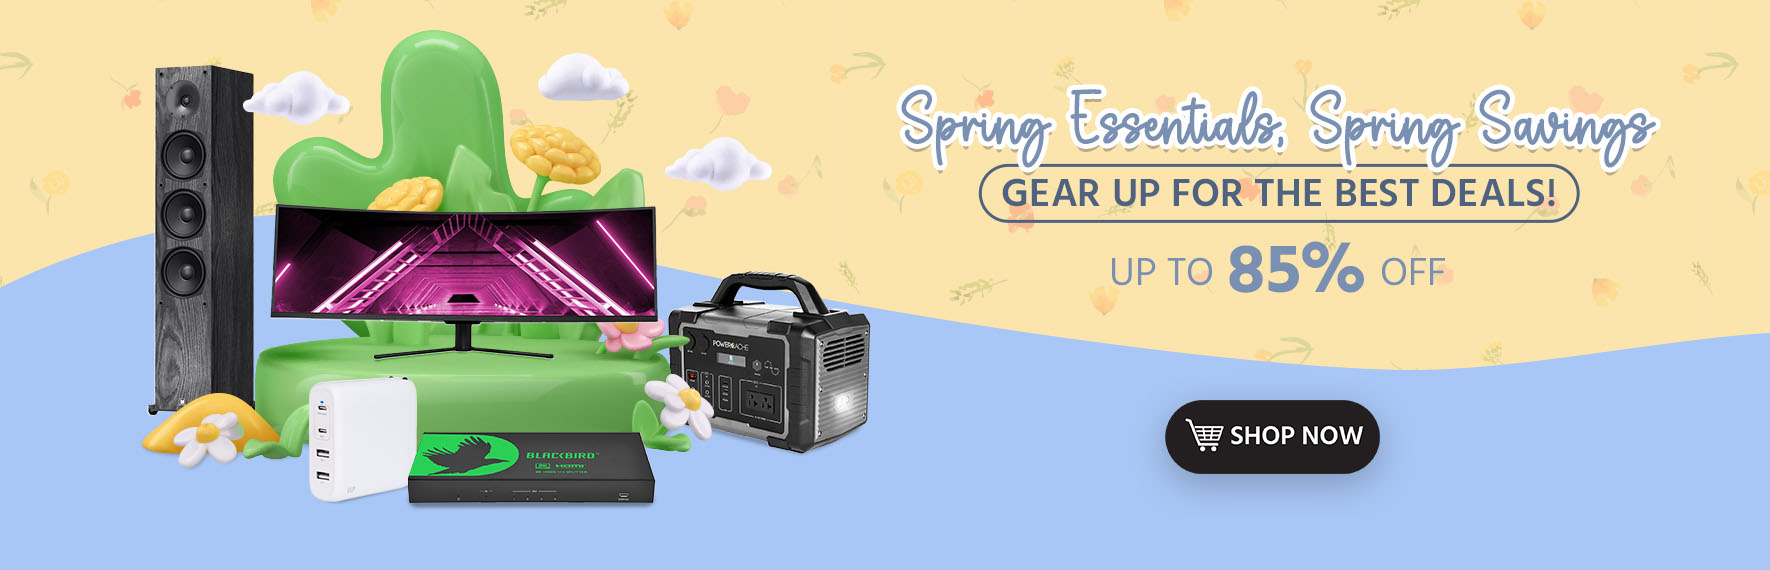 Spring Essentials, Spring Savings Gear Up for the Best Deals! Up to 85% OFF Shop Now